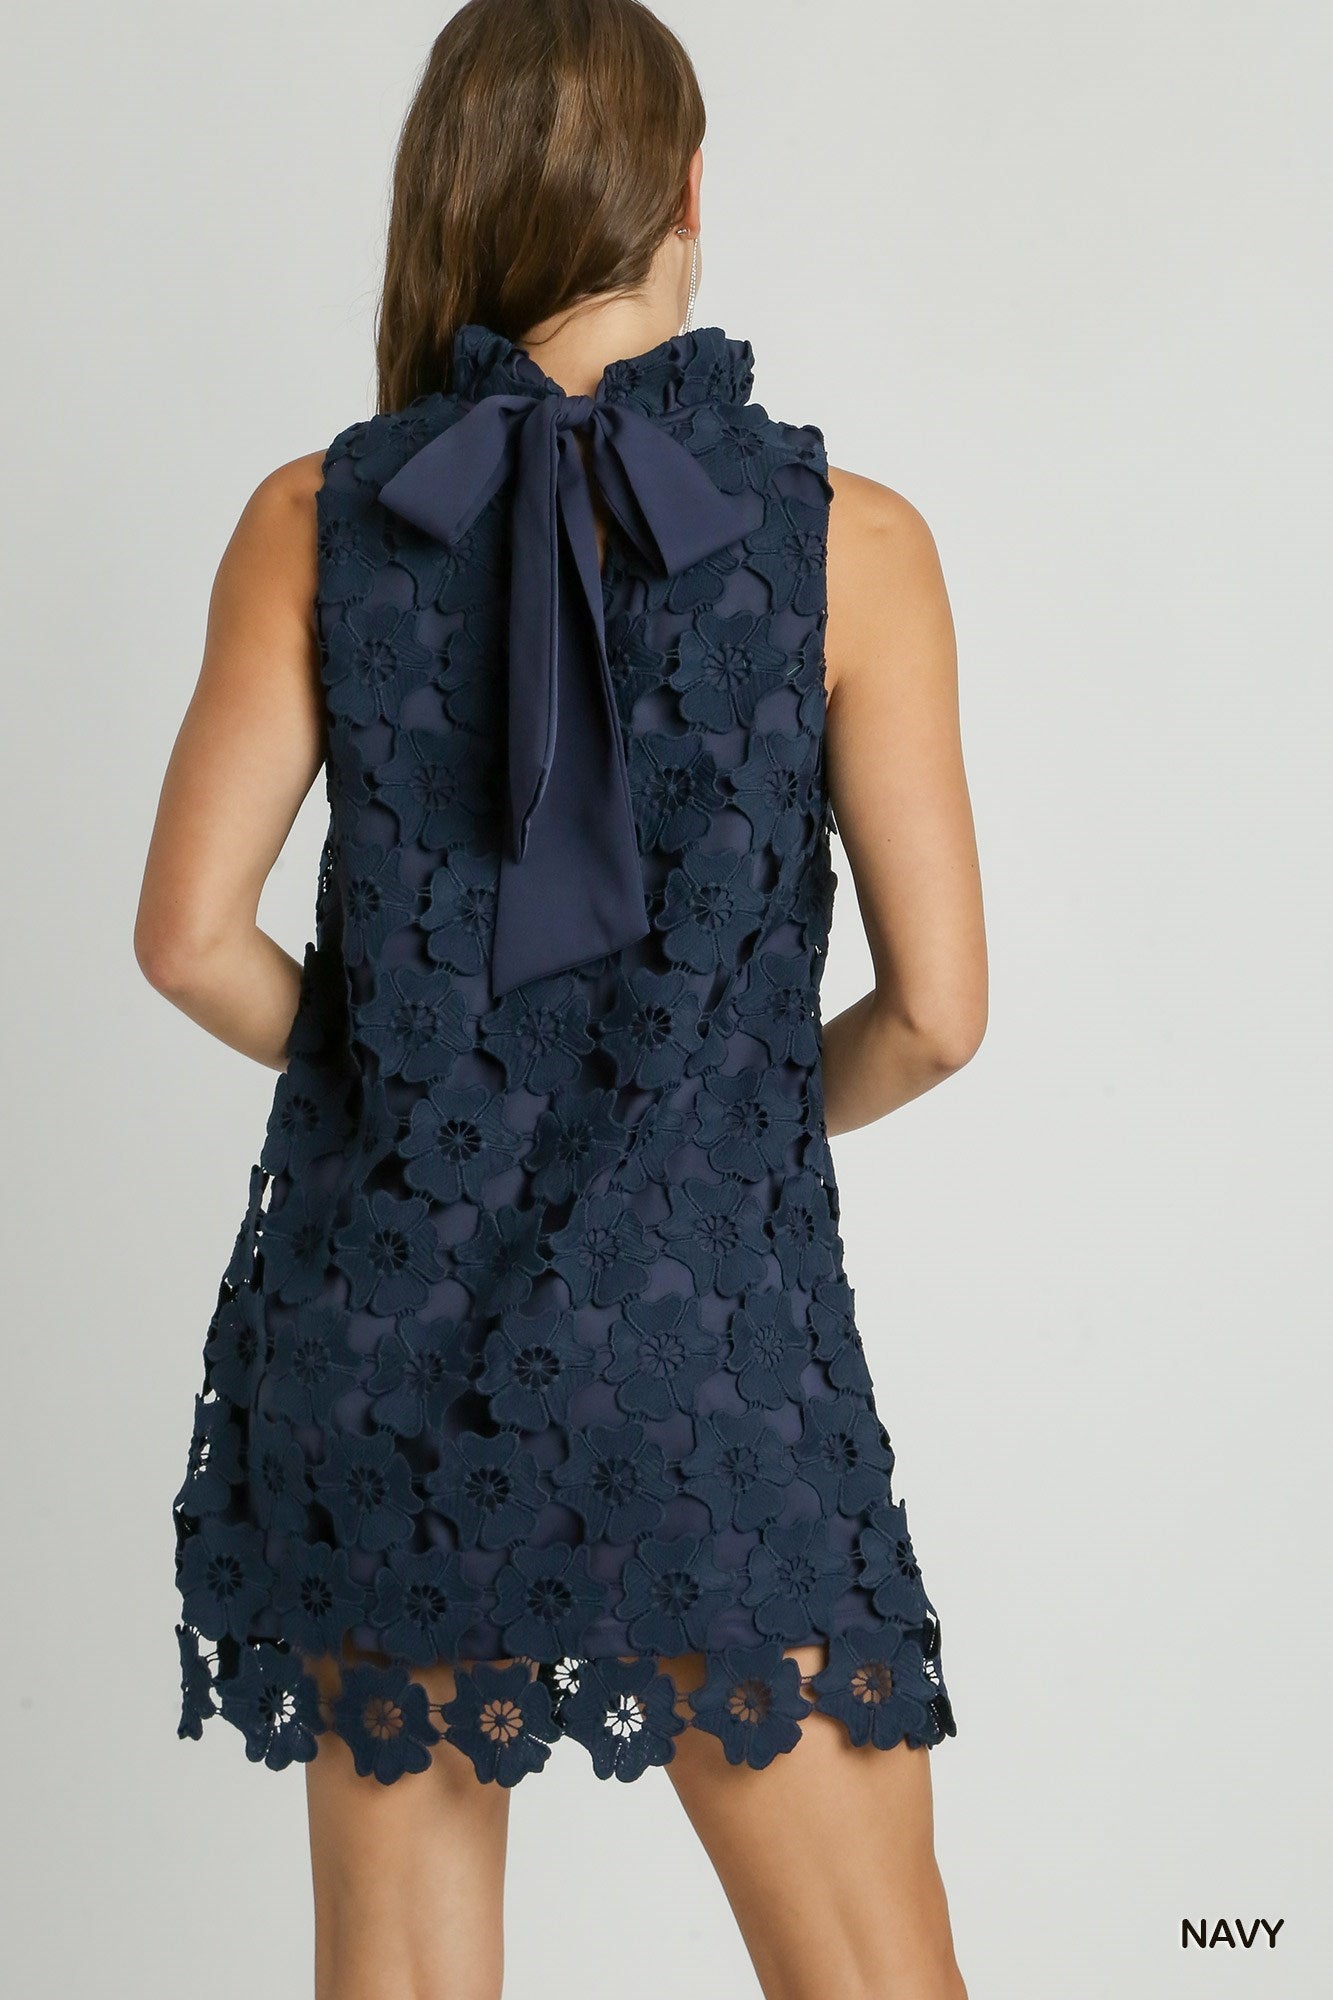 Navy Floral Lace High Neck Sleeveless Dress with Back Bow Tie